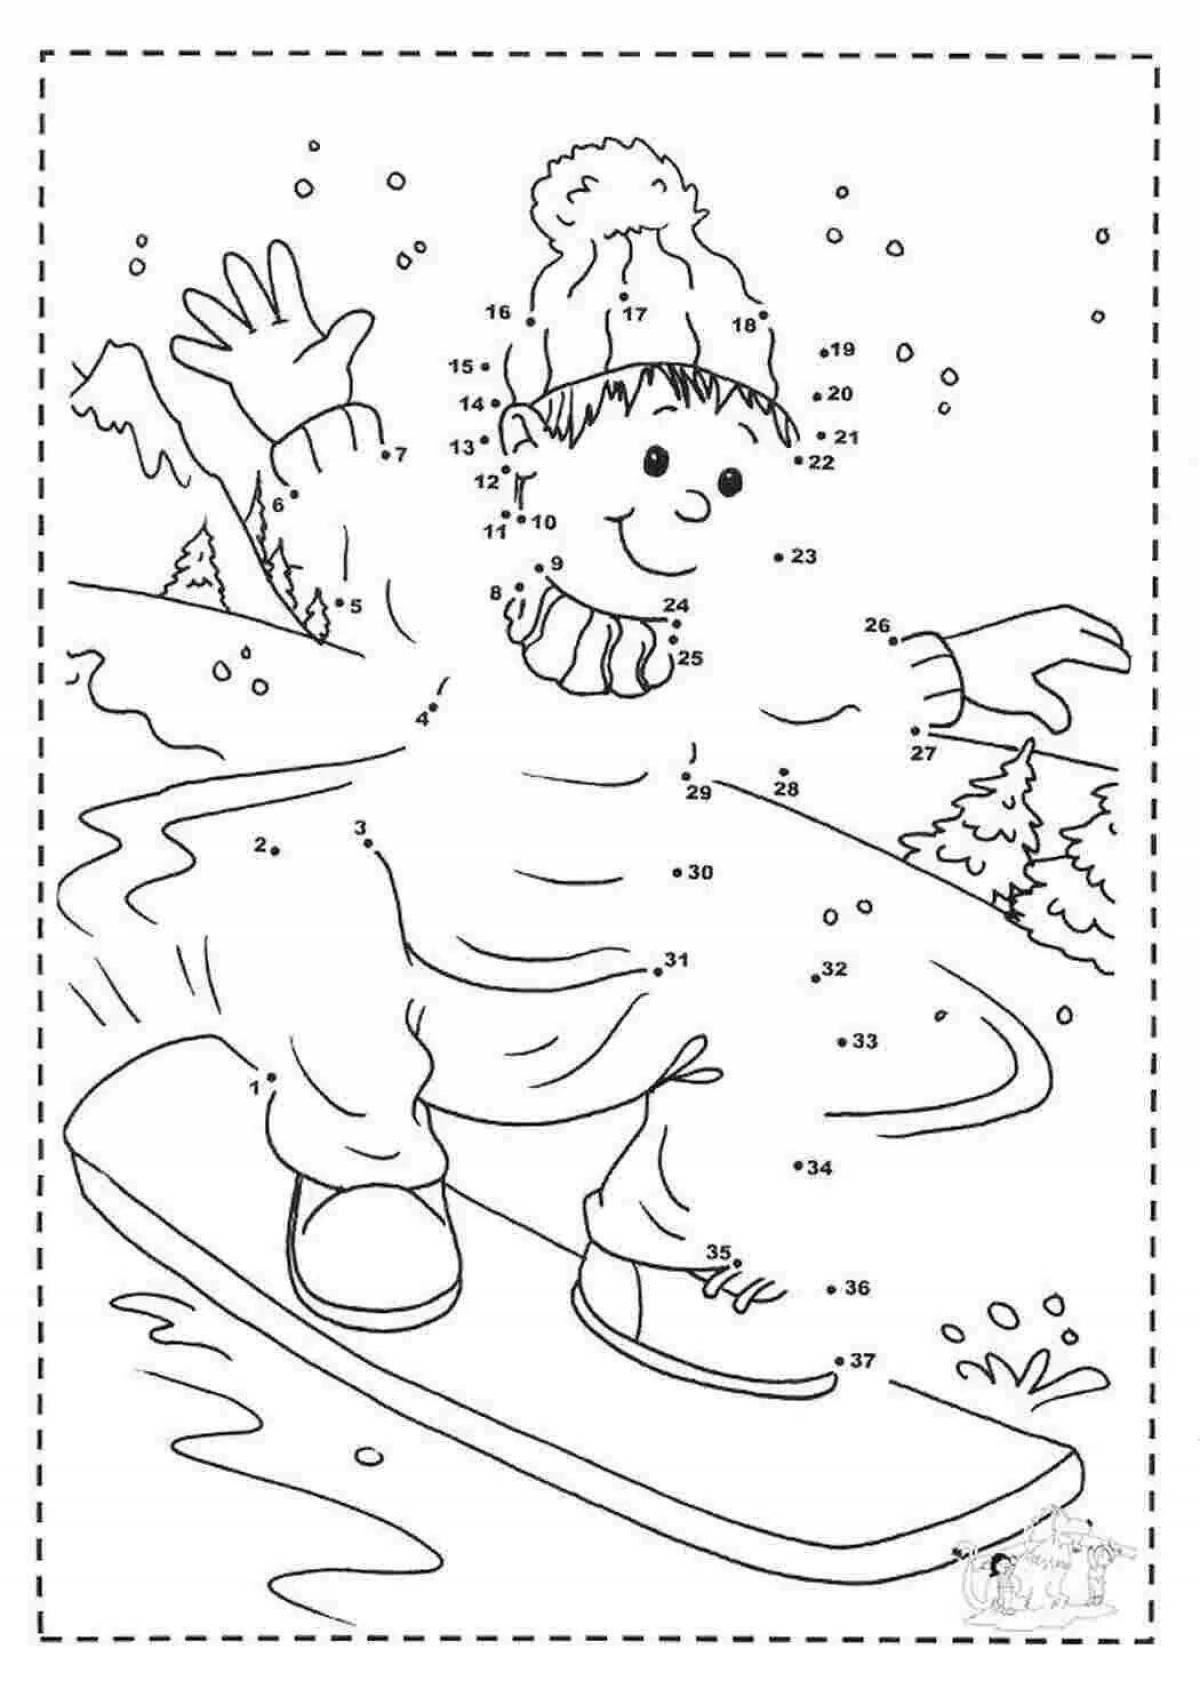 Coloring book beckoning winter in numbers